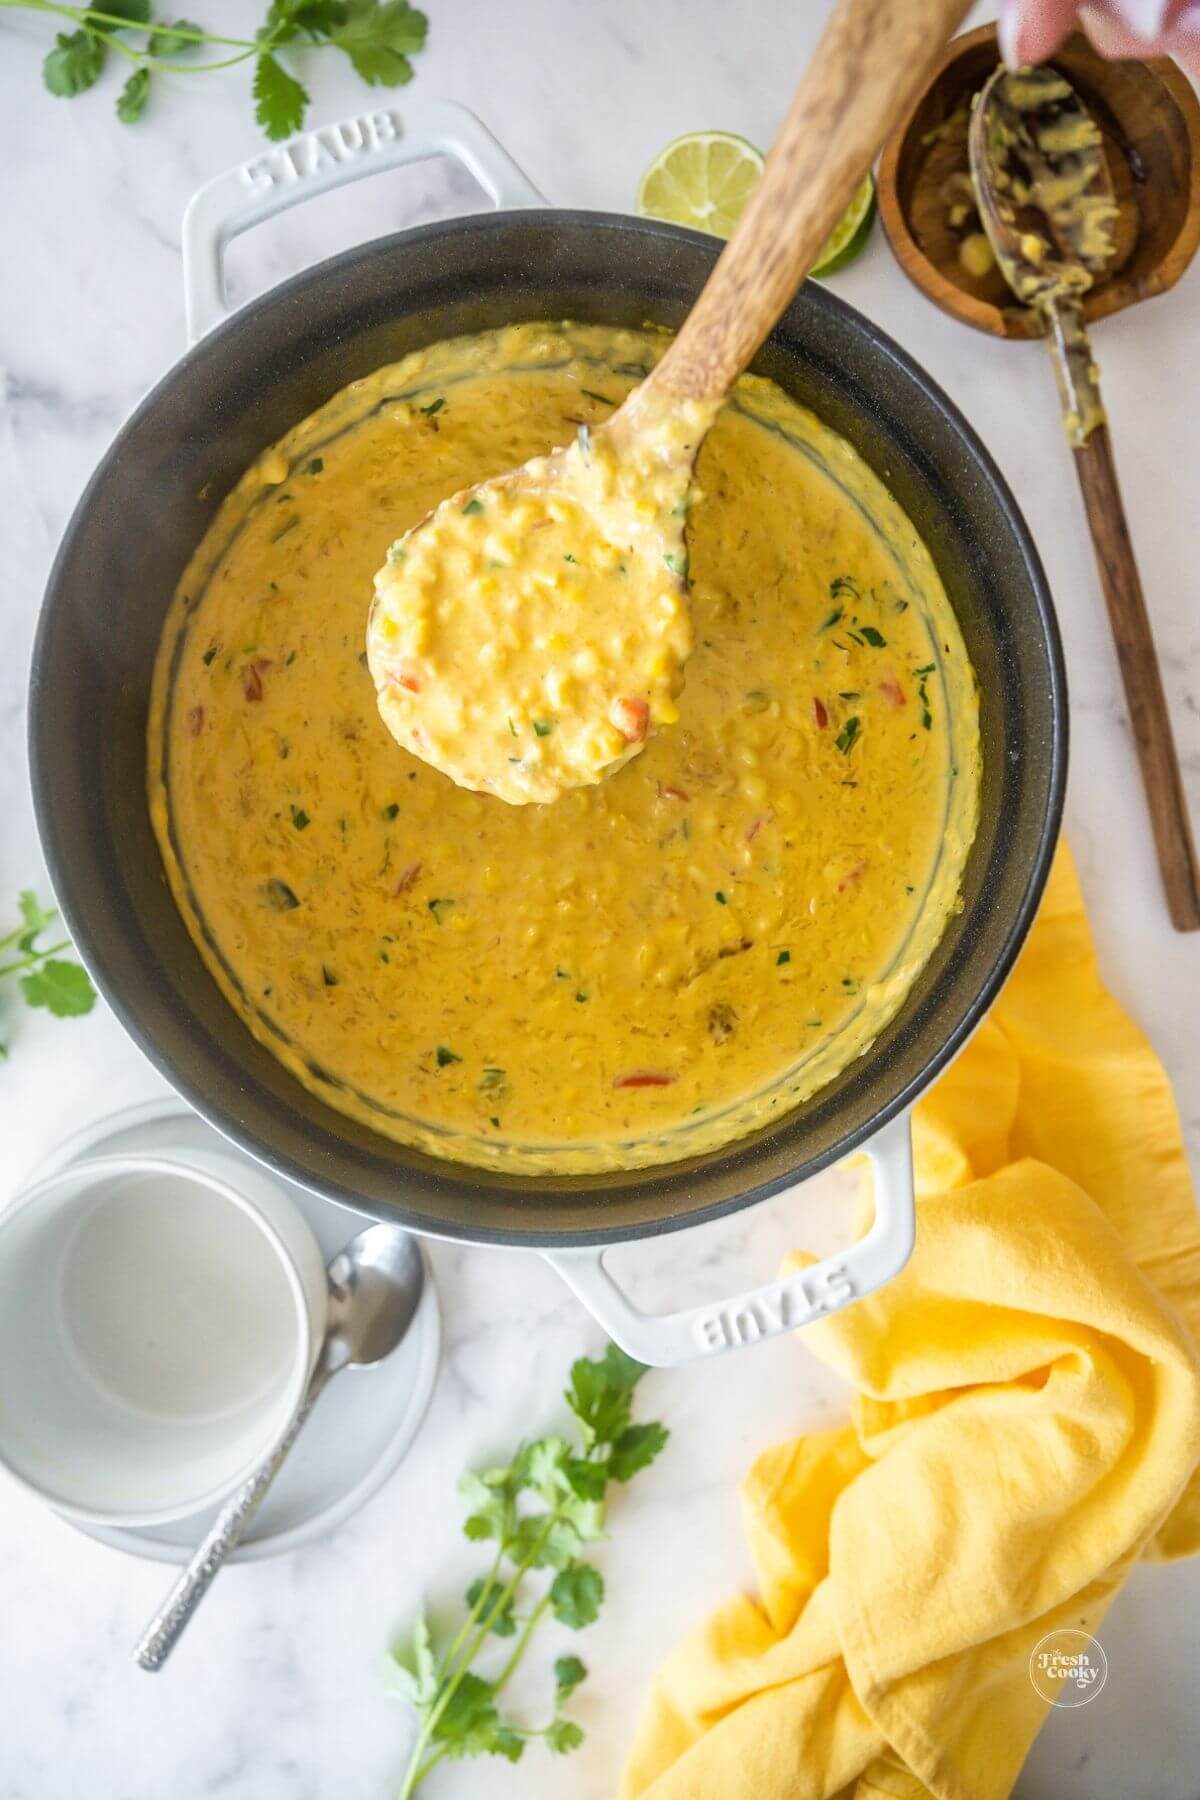 Spoonful of Panera Bread Corn Chowder recipe out of soup pot, to pin.